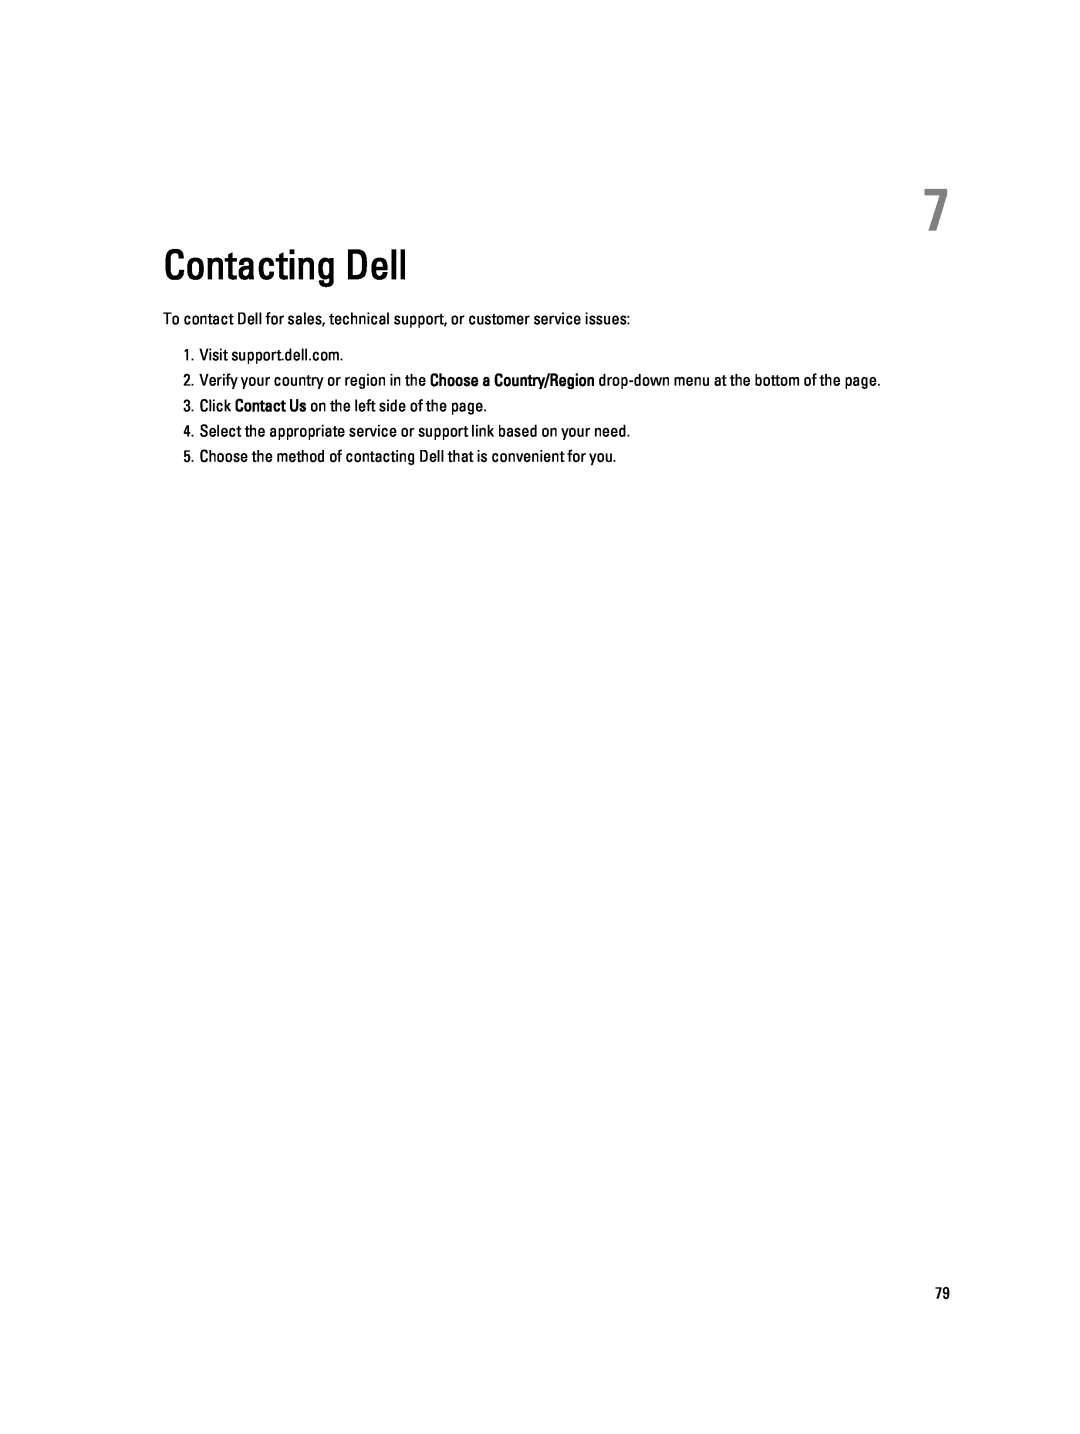 Dell 9010, W04C owner manual Contacting Dell, Visit support.dell.com, Click Contact Us on the left side of the page 